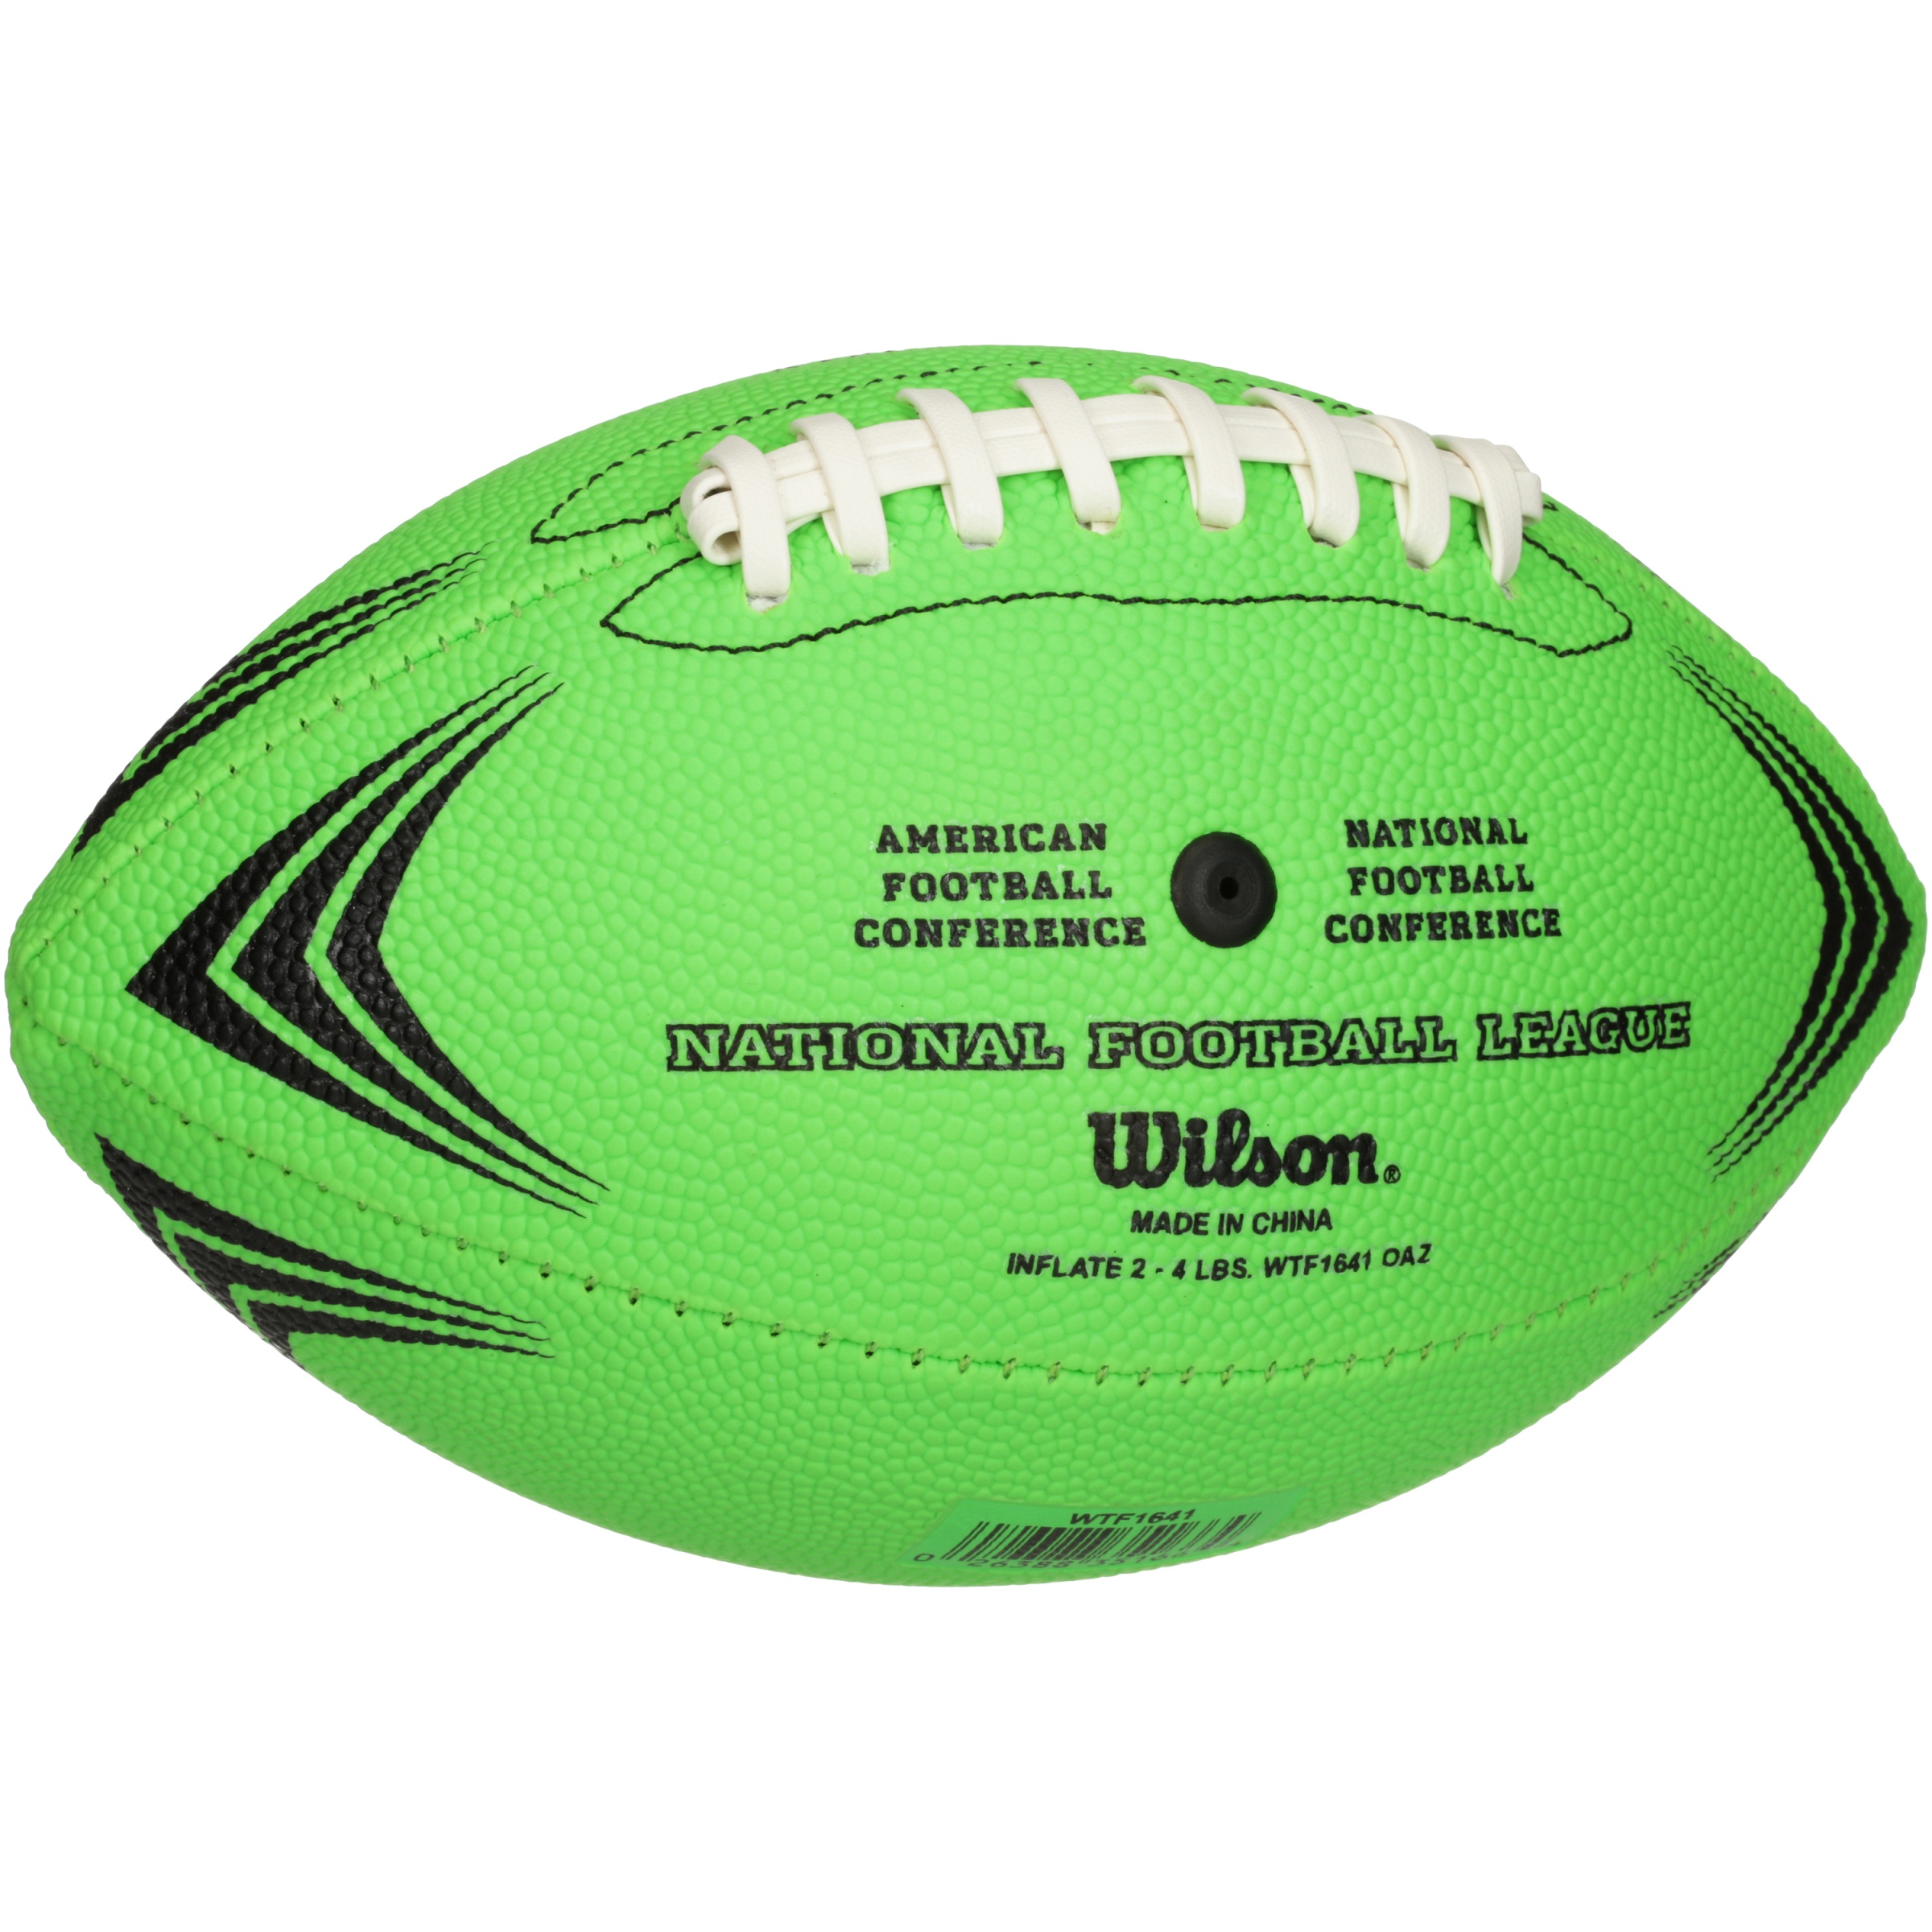 Wilson Sporting Goods NFL Mini Rubber Youth Football, Green - image 3 of 4